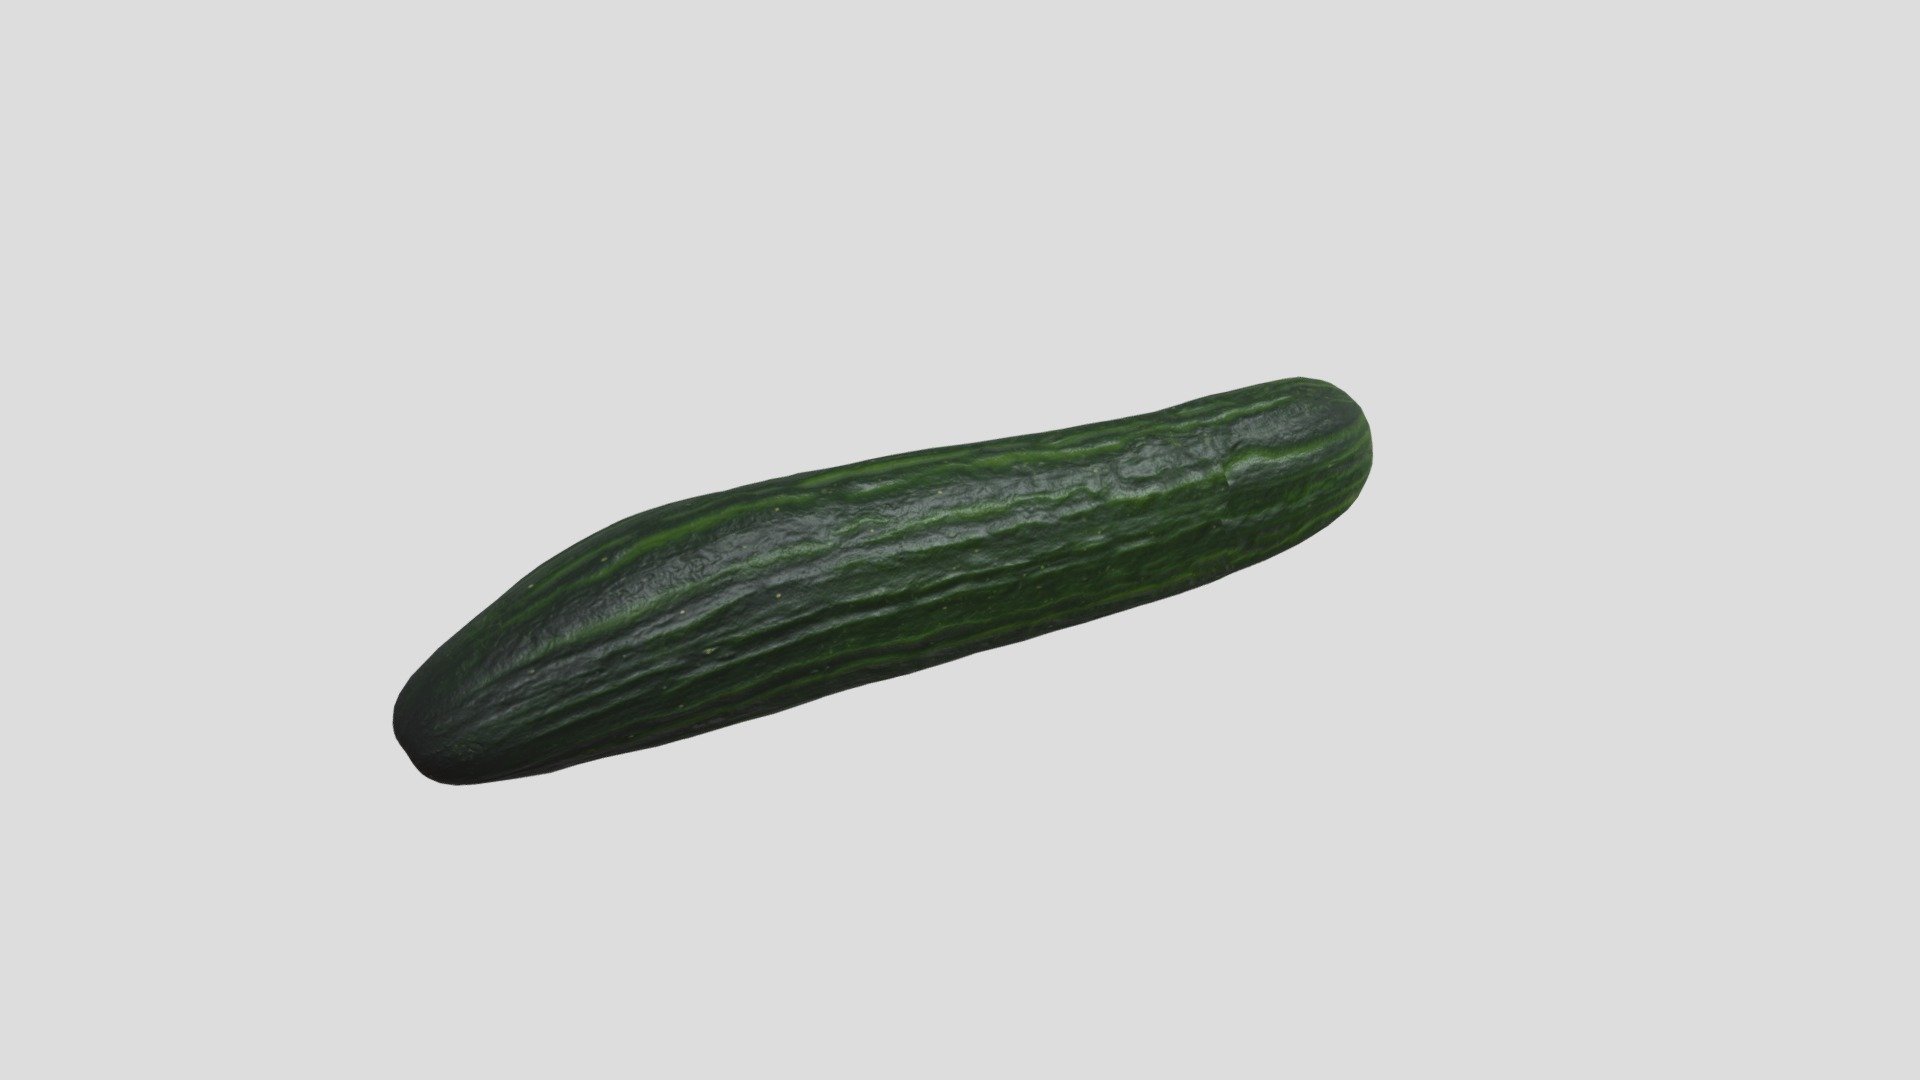 This is a high quality scanned model of a cucumber. The scale is pretty large, so scale it down as you need.

Model originally from Quixel Megascans. I am offering it here for free as I obtained it for free. 

For usage permission, refer to their website. I have no affiliation with QM, I just think they have great quality 3D models. : ) - Pickling Cucumber - Download Free 3D model by chapmanecodesign 3d model